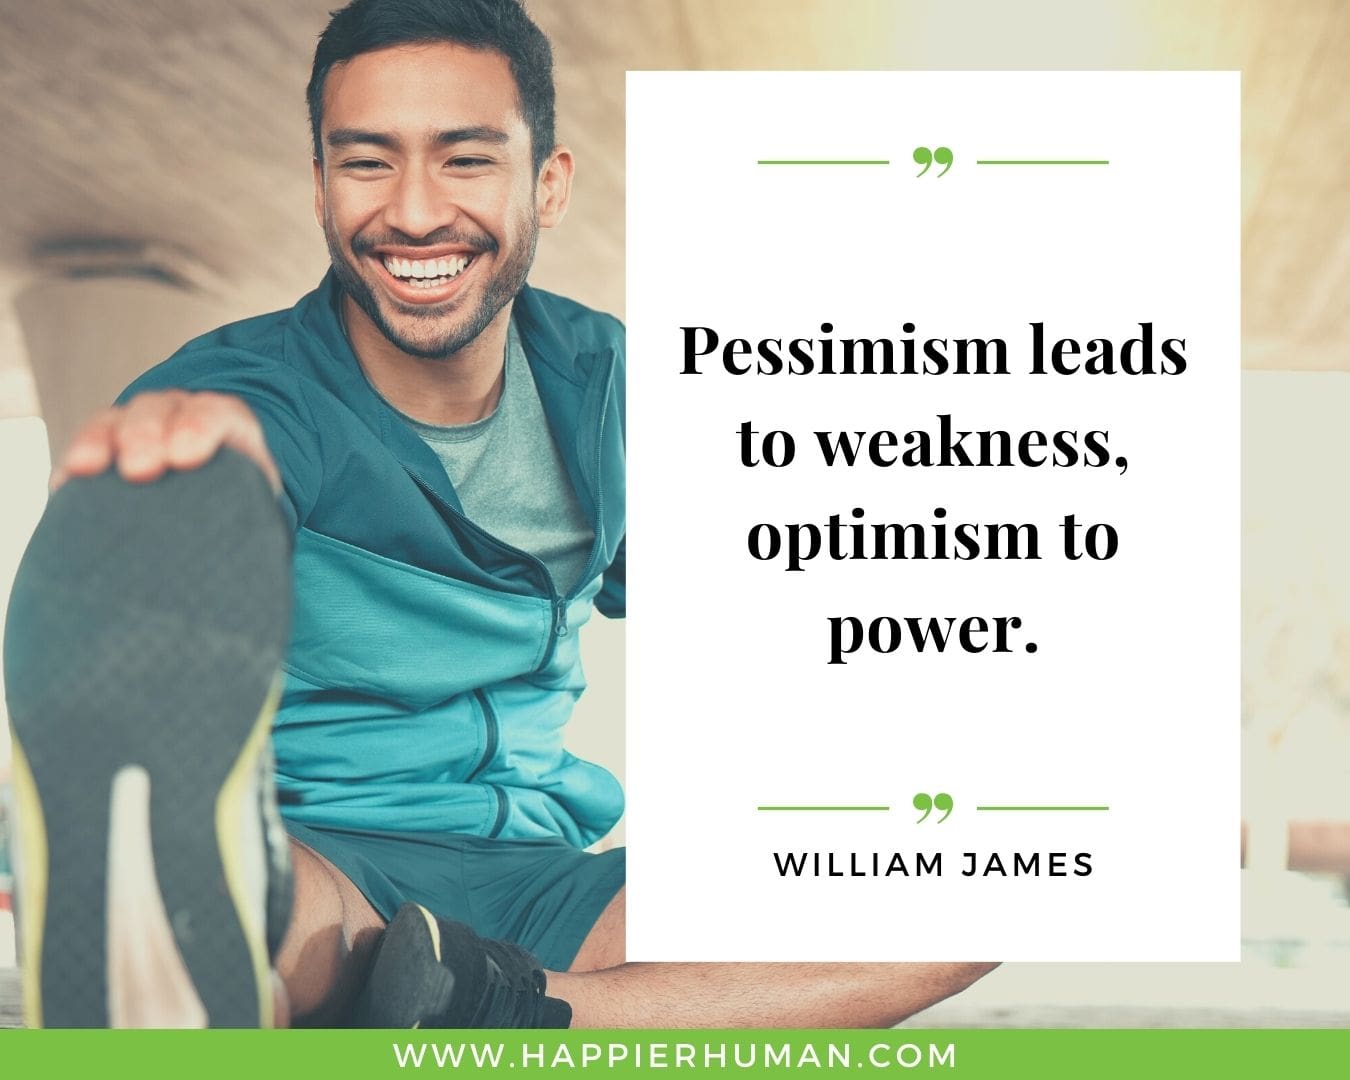 Positive Energy Quotes - “Pessimism leads to weakness, optimism to power.” - William James